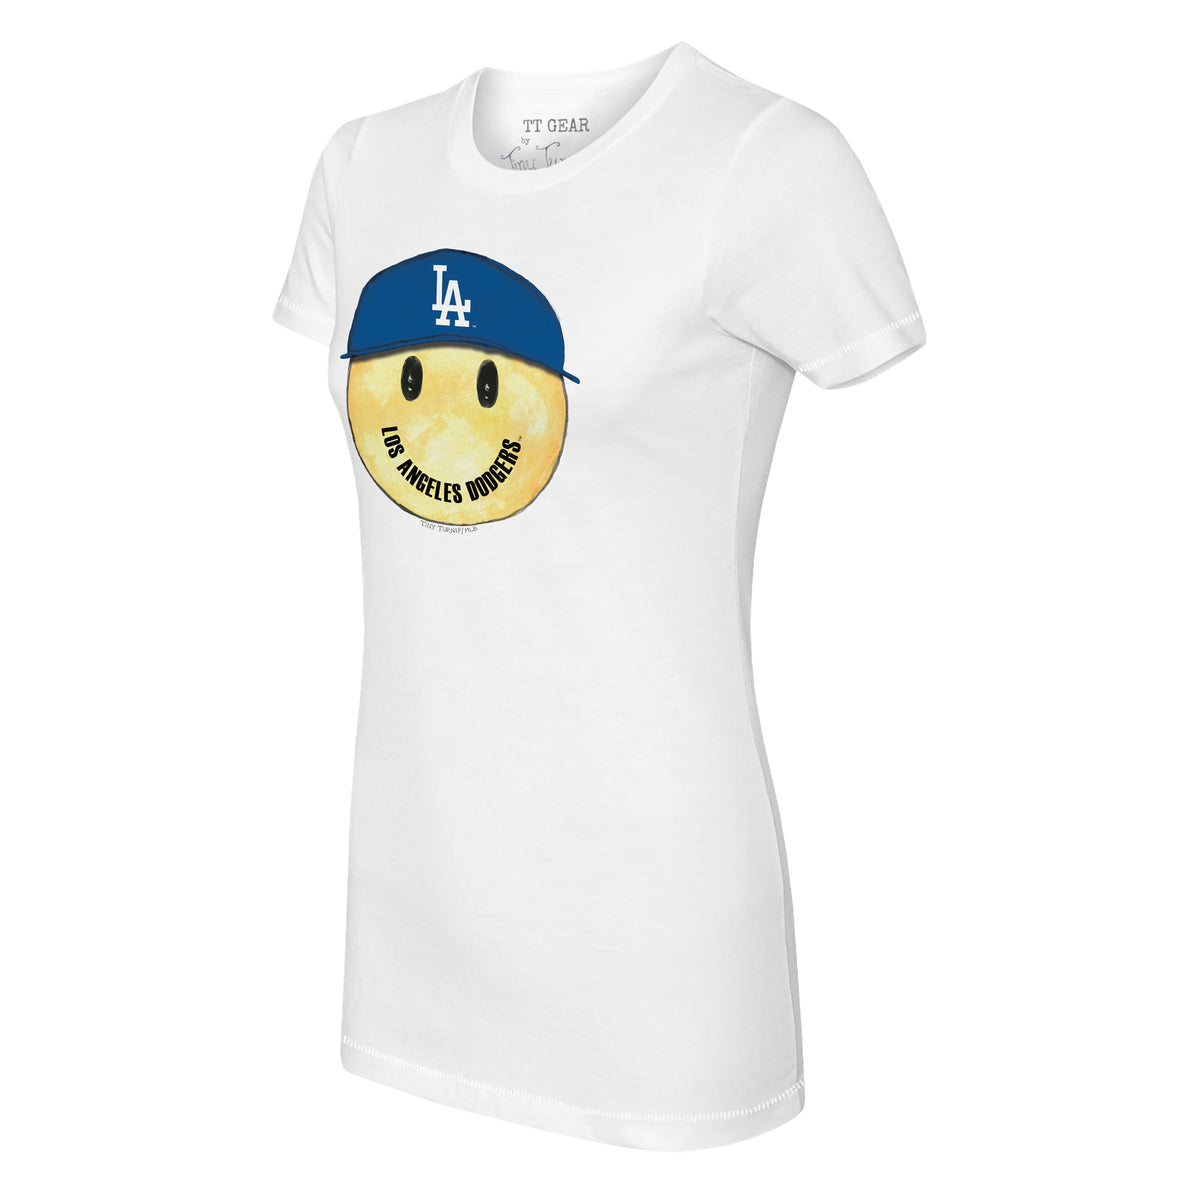 Los Angeles Dodgers Smiley Tee Shirt